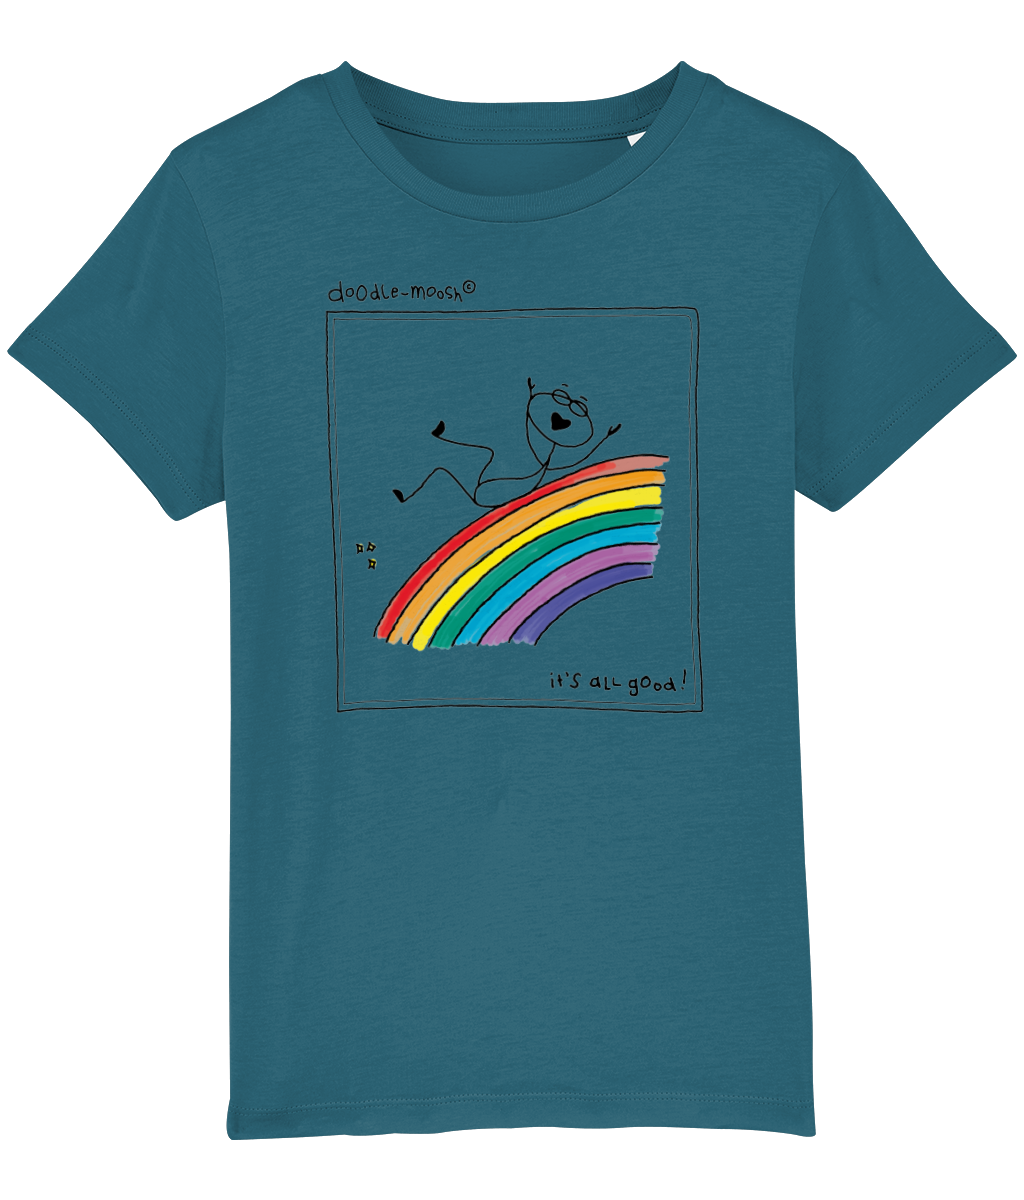 it's all good t-shirt, blue with black, colored rainbow